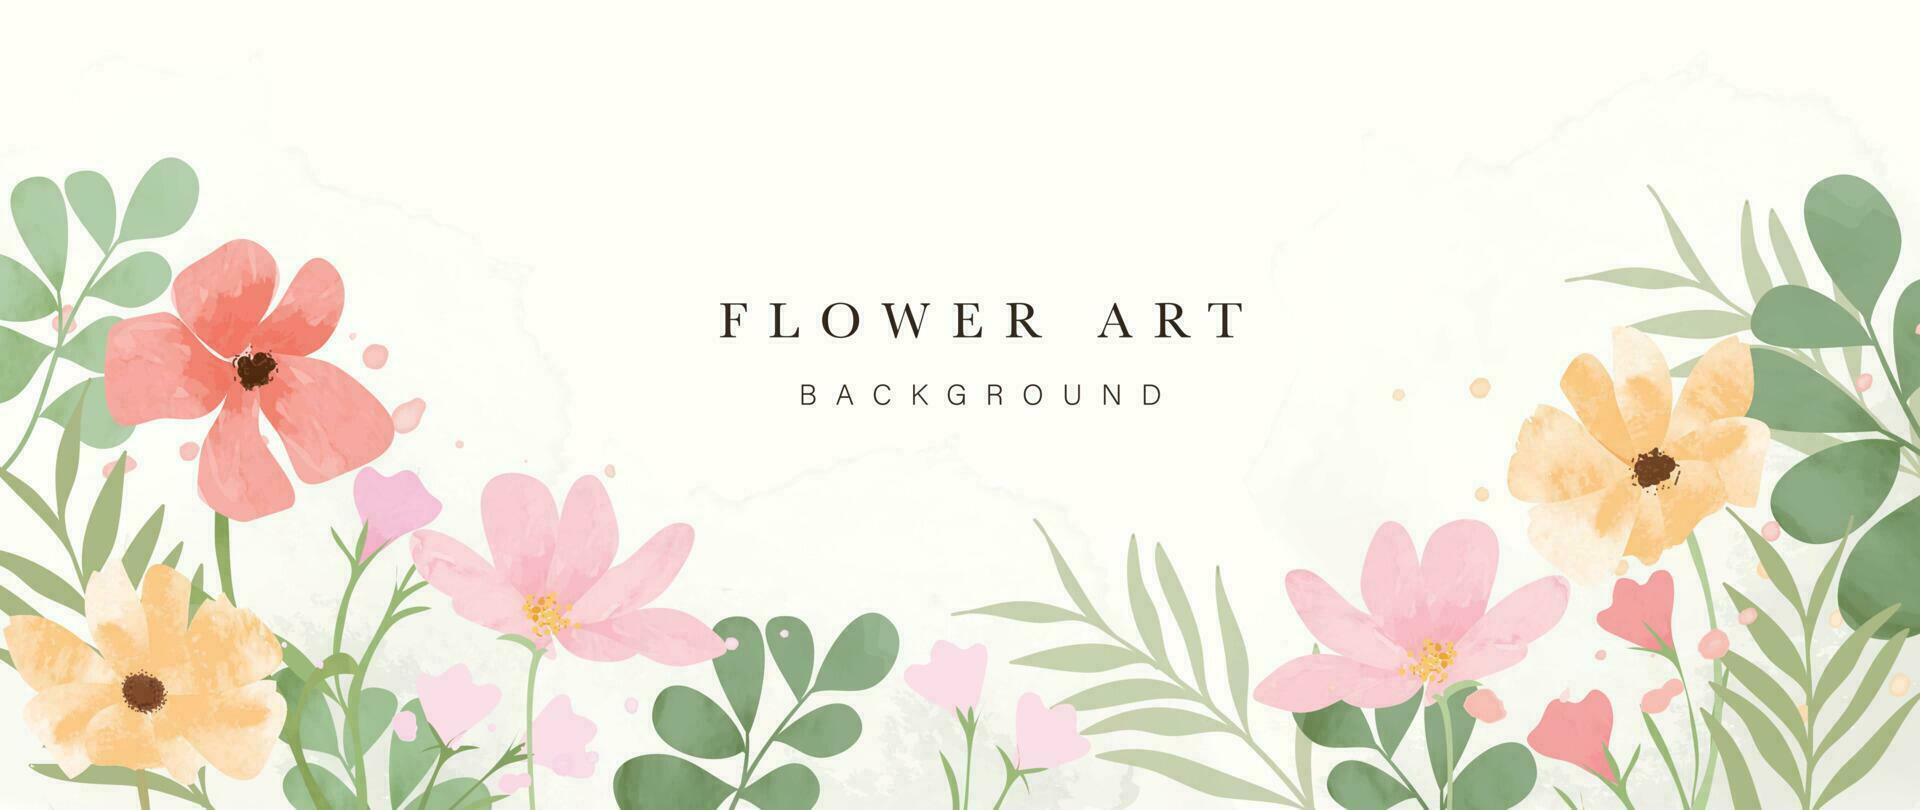 Spring floral art background vector. Botanical watercolor hand drawn flowers, leaves, plants. Blossom design illustration for wallpaper, banner, print, poster, cover, greeting and invitation card. vector